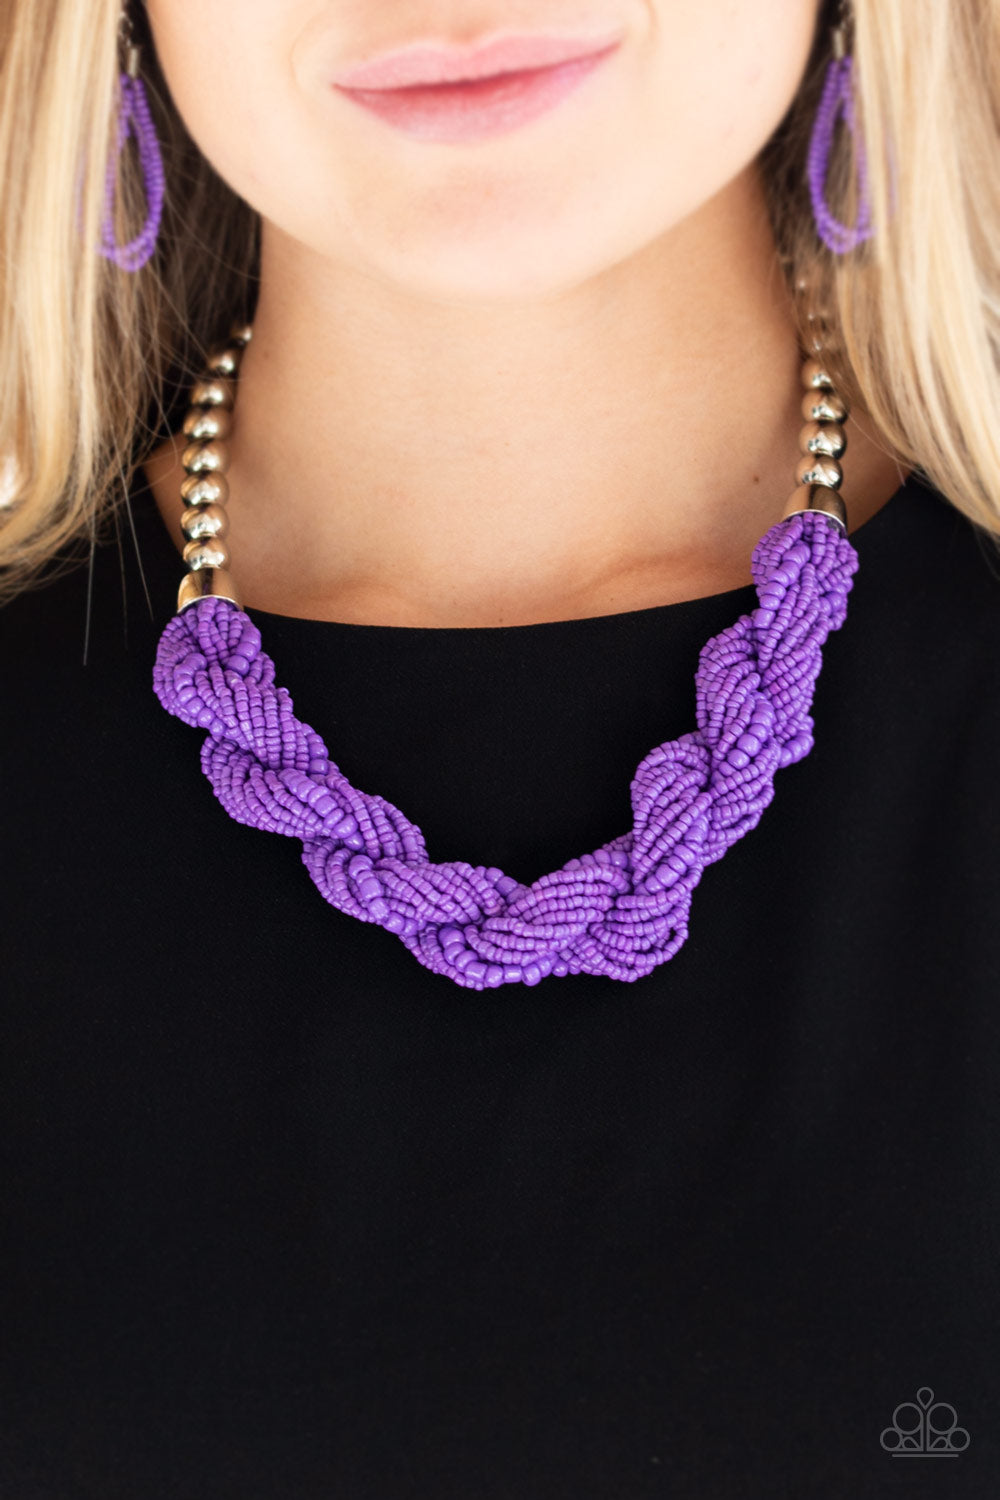 Paparazzi Jewelry & Accessories - Savannah Surfin - Purple Seed Bead Necklace. Bling By Titia Boutique